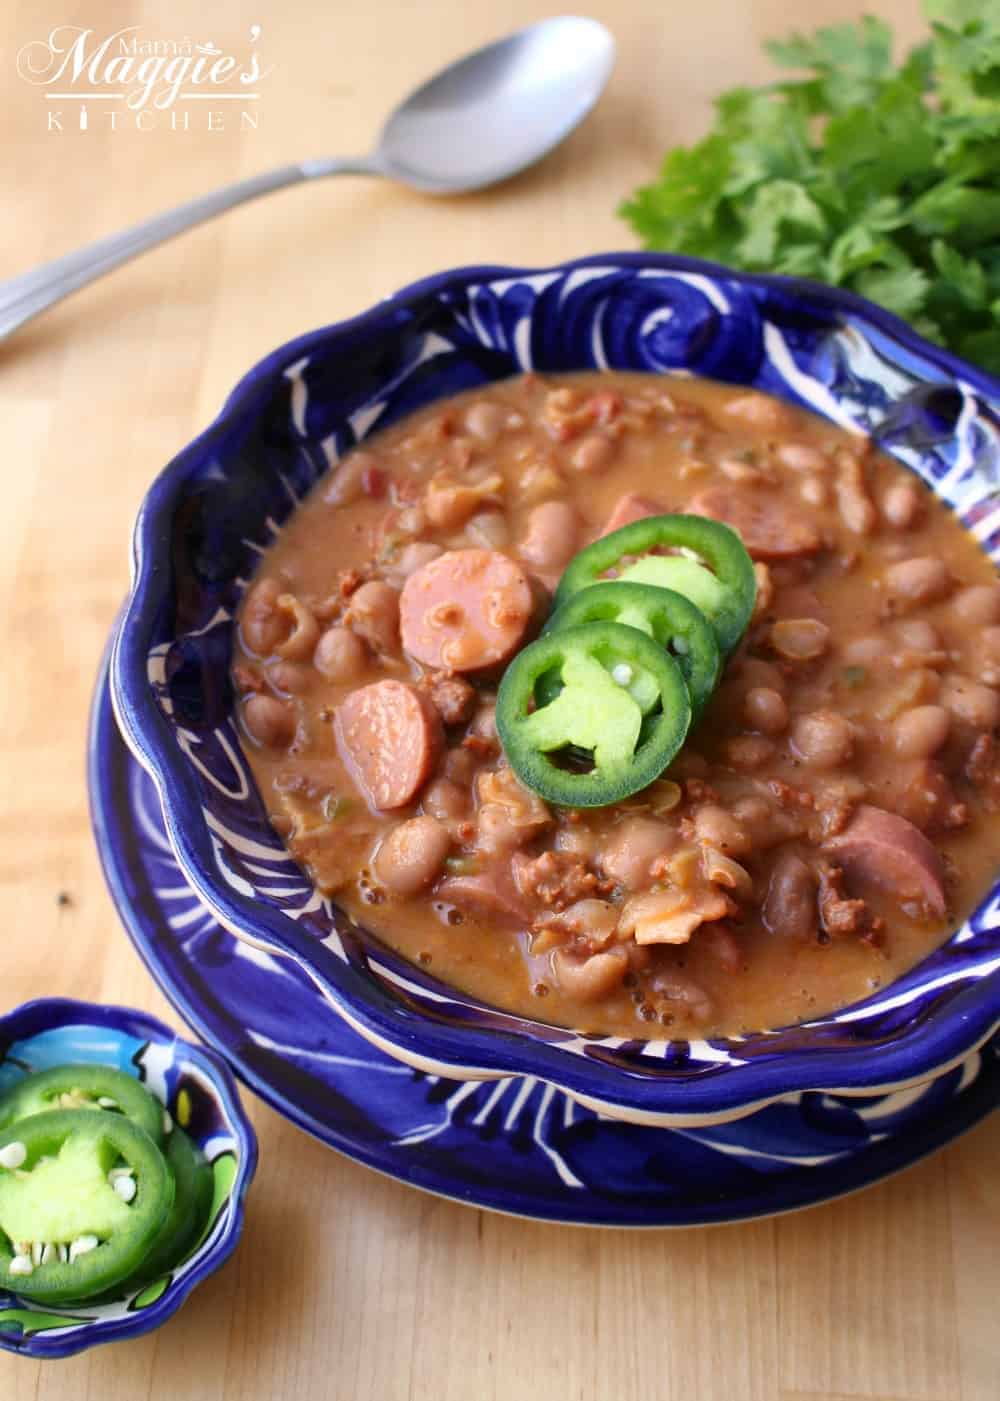 Frijoles Charros in a decorative blue bowl topped with jalapeno slices.